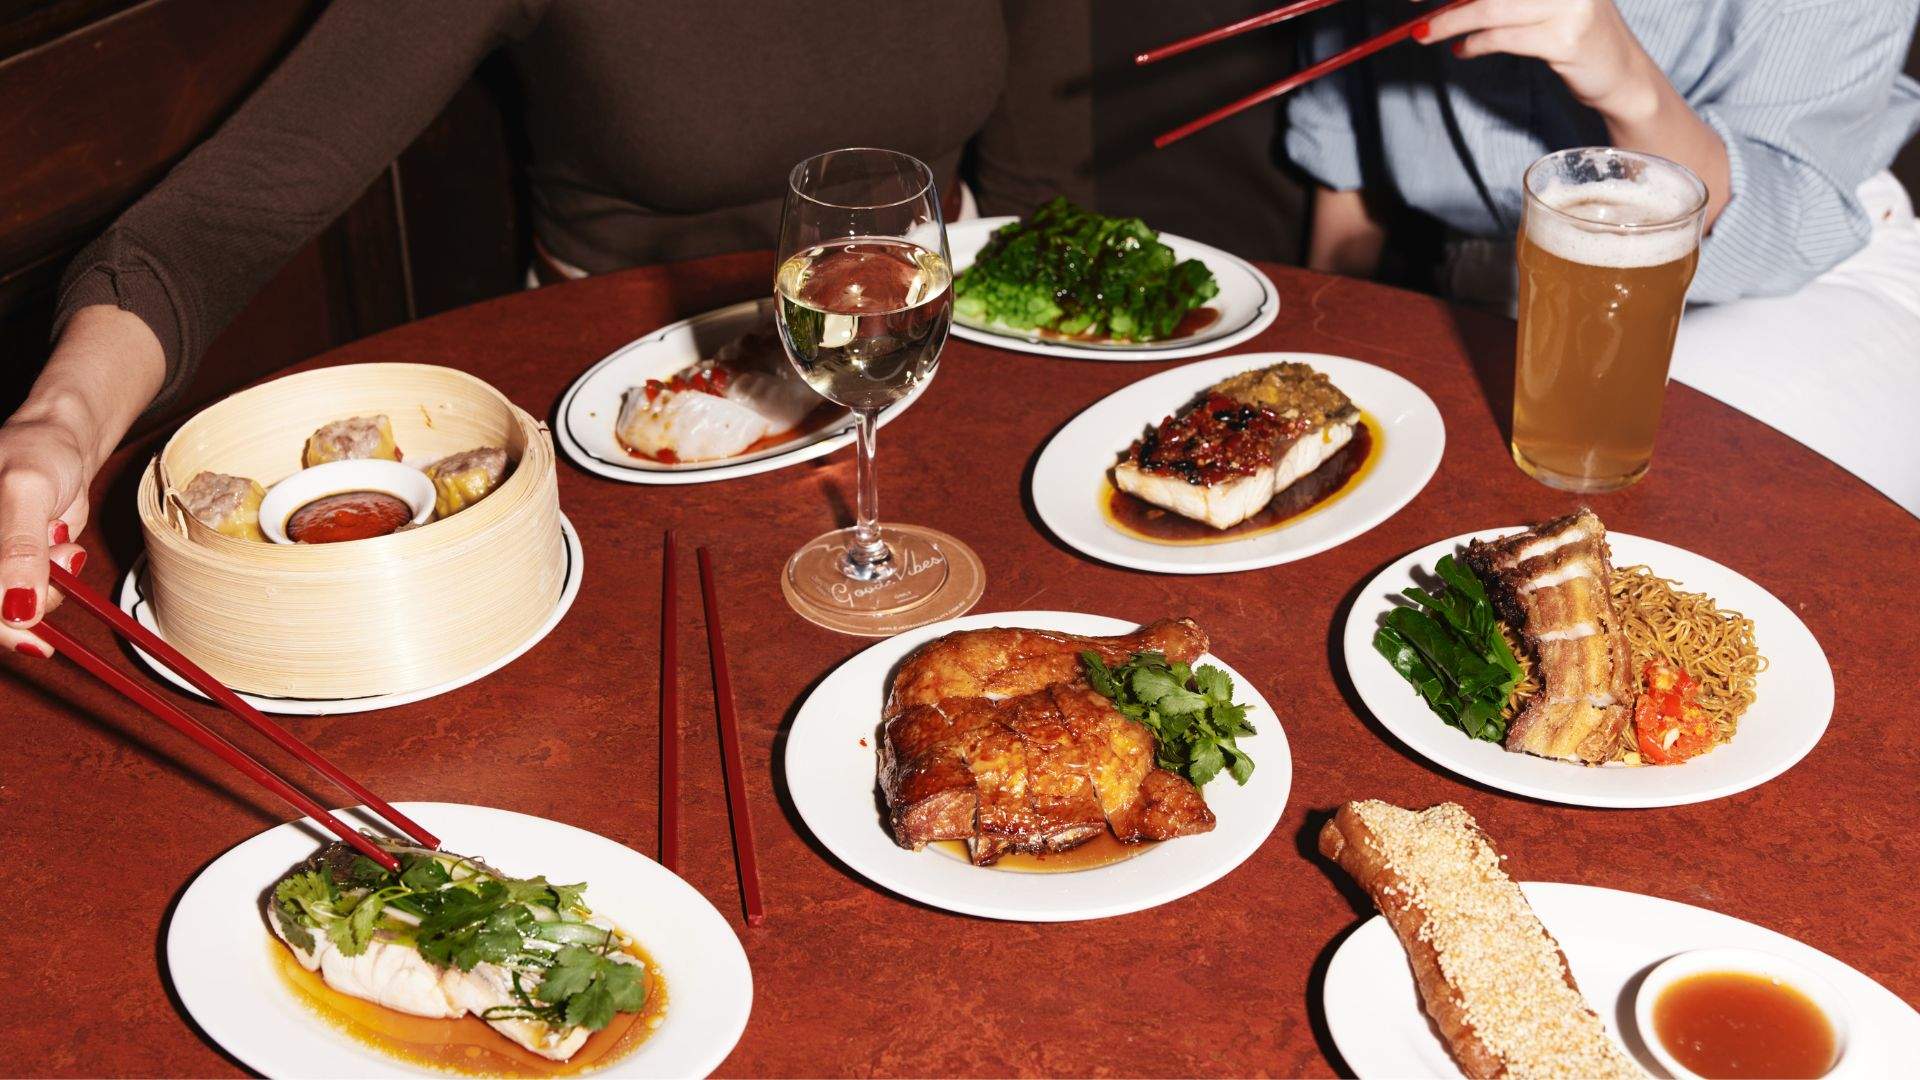 A selection of Cantonese dishes from The Taphouse's newly revamped menu.